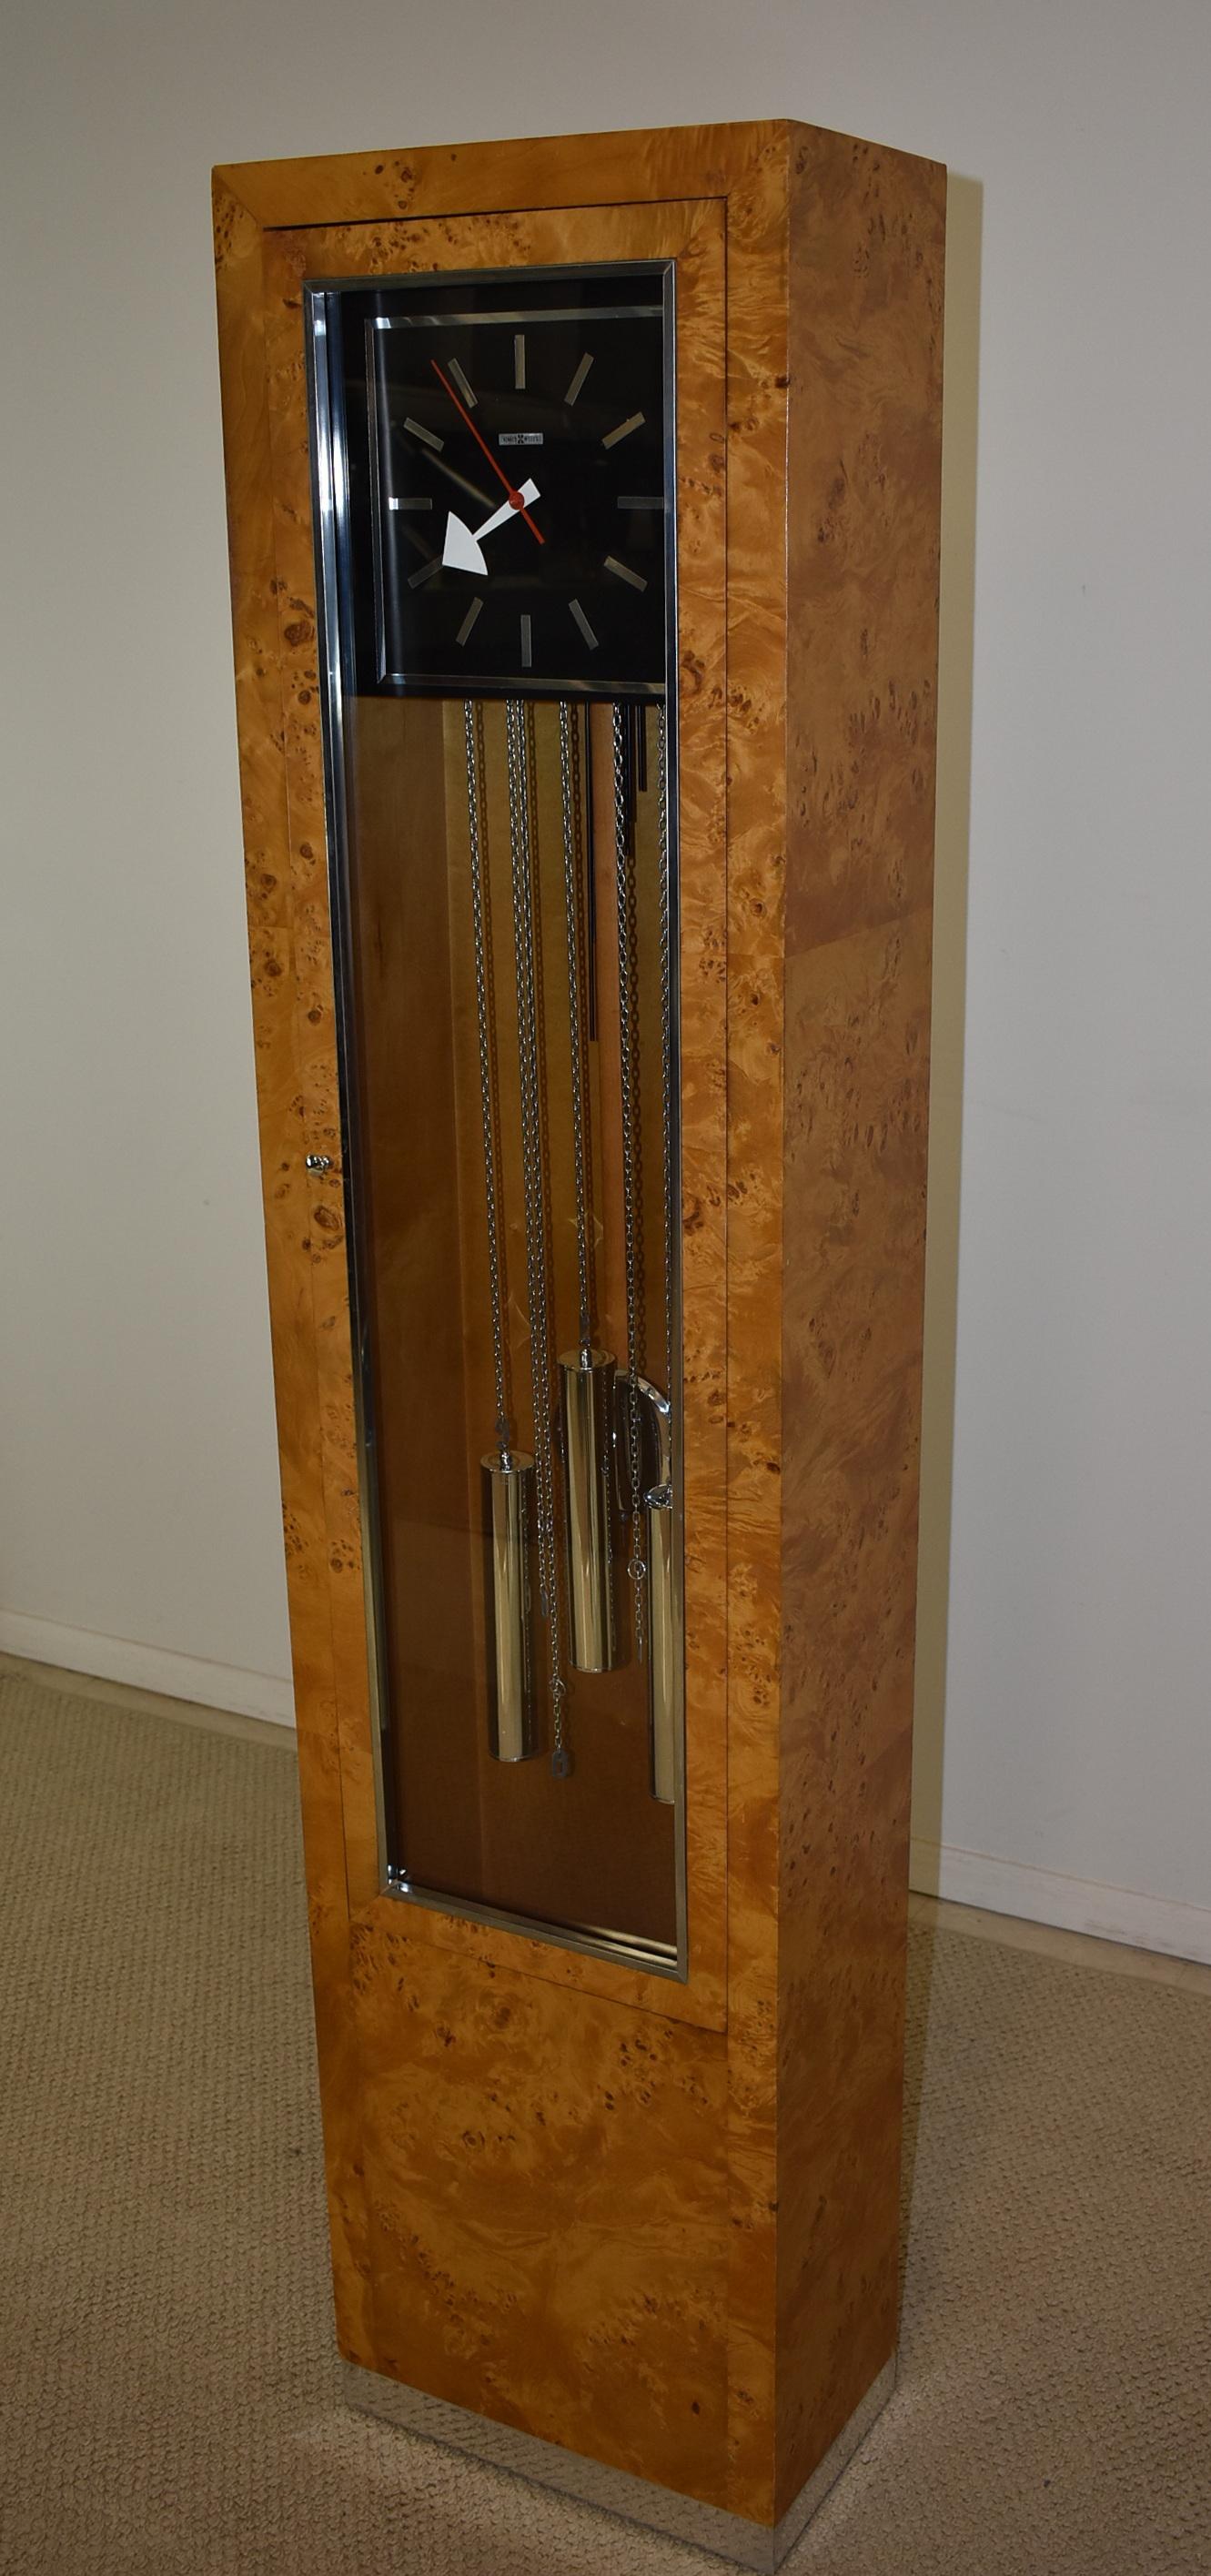 Mid-Century Modern olivewood case Howard Miller floor clock. Chrome base. Runs. Chimes need to be adjusted. Very good condition. Dimensions: 9